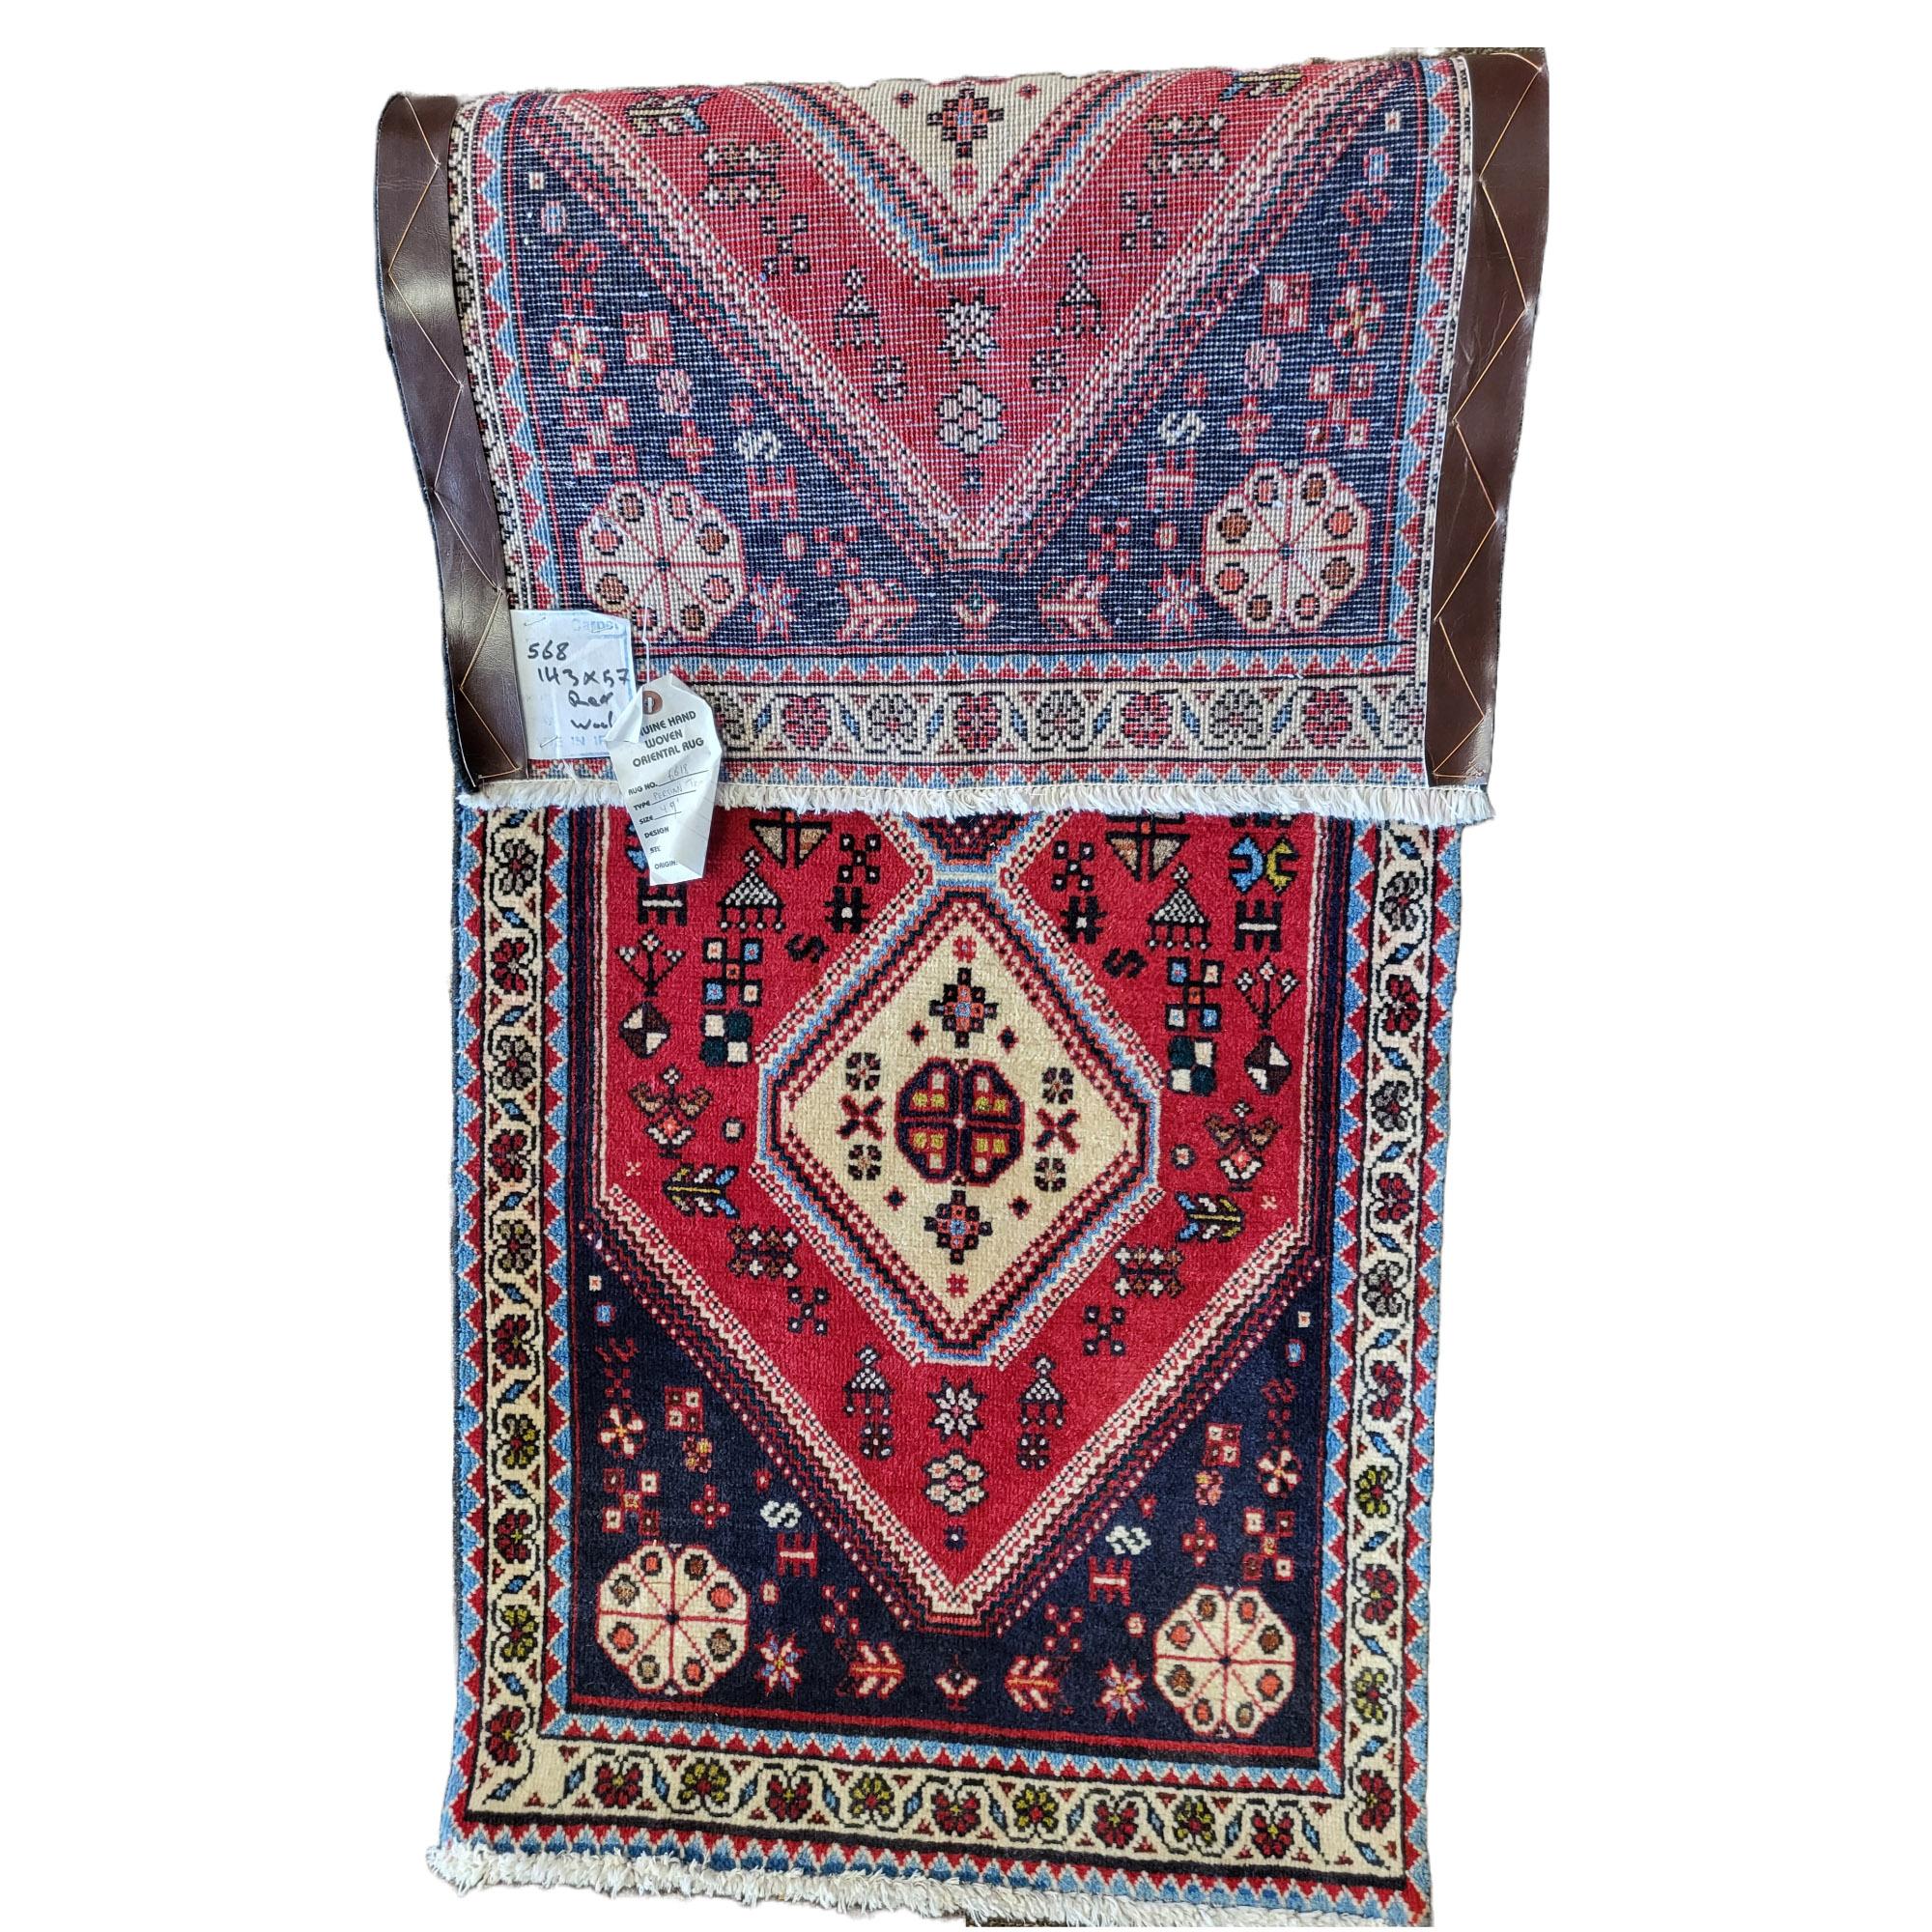 Beautiful 60's Persian Abadeh Runner

1ft 9 in x 4ft

Just north of the Shiraz lies the city of Abadeh. This ancient city was once home to 100's of different rug weaving tribes. For thousands of years nomads have inhabited this area, including the